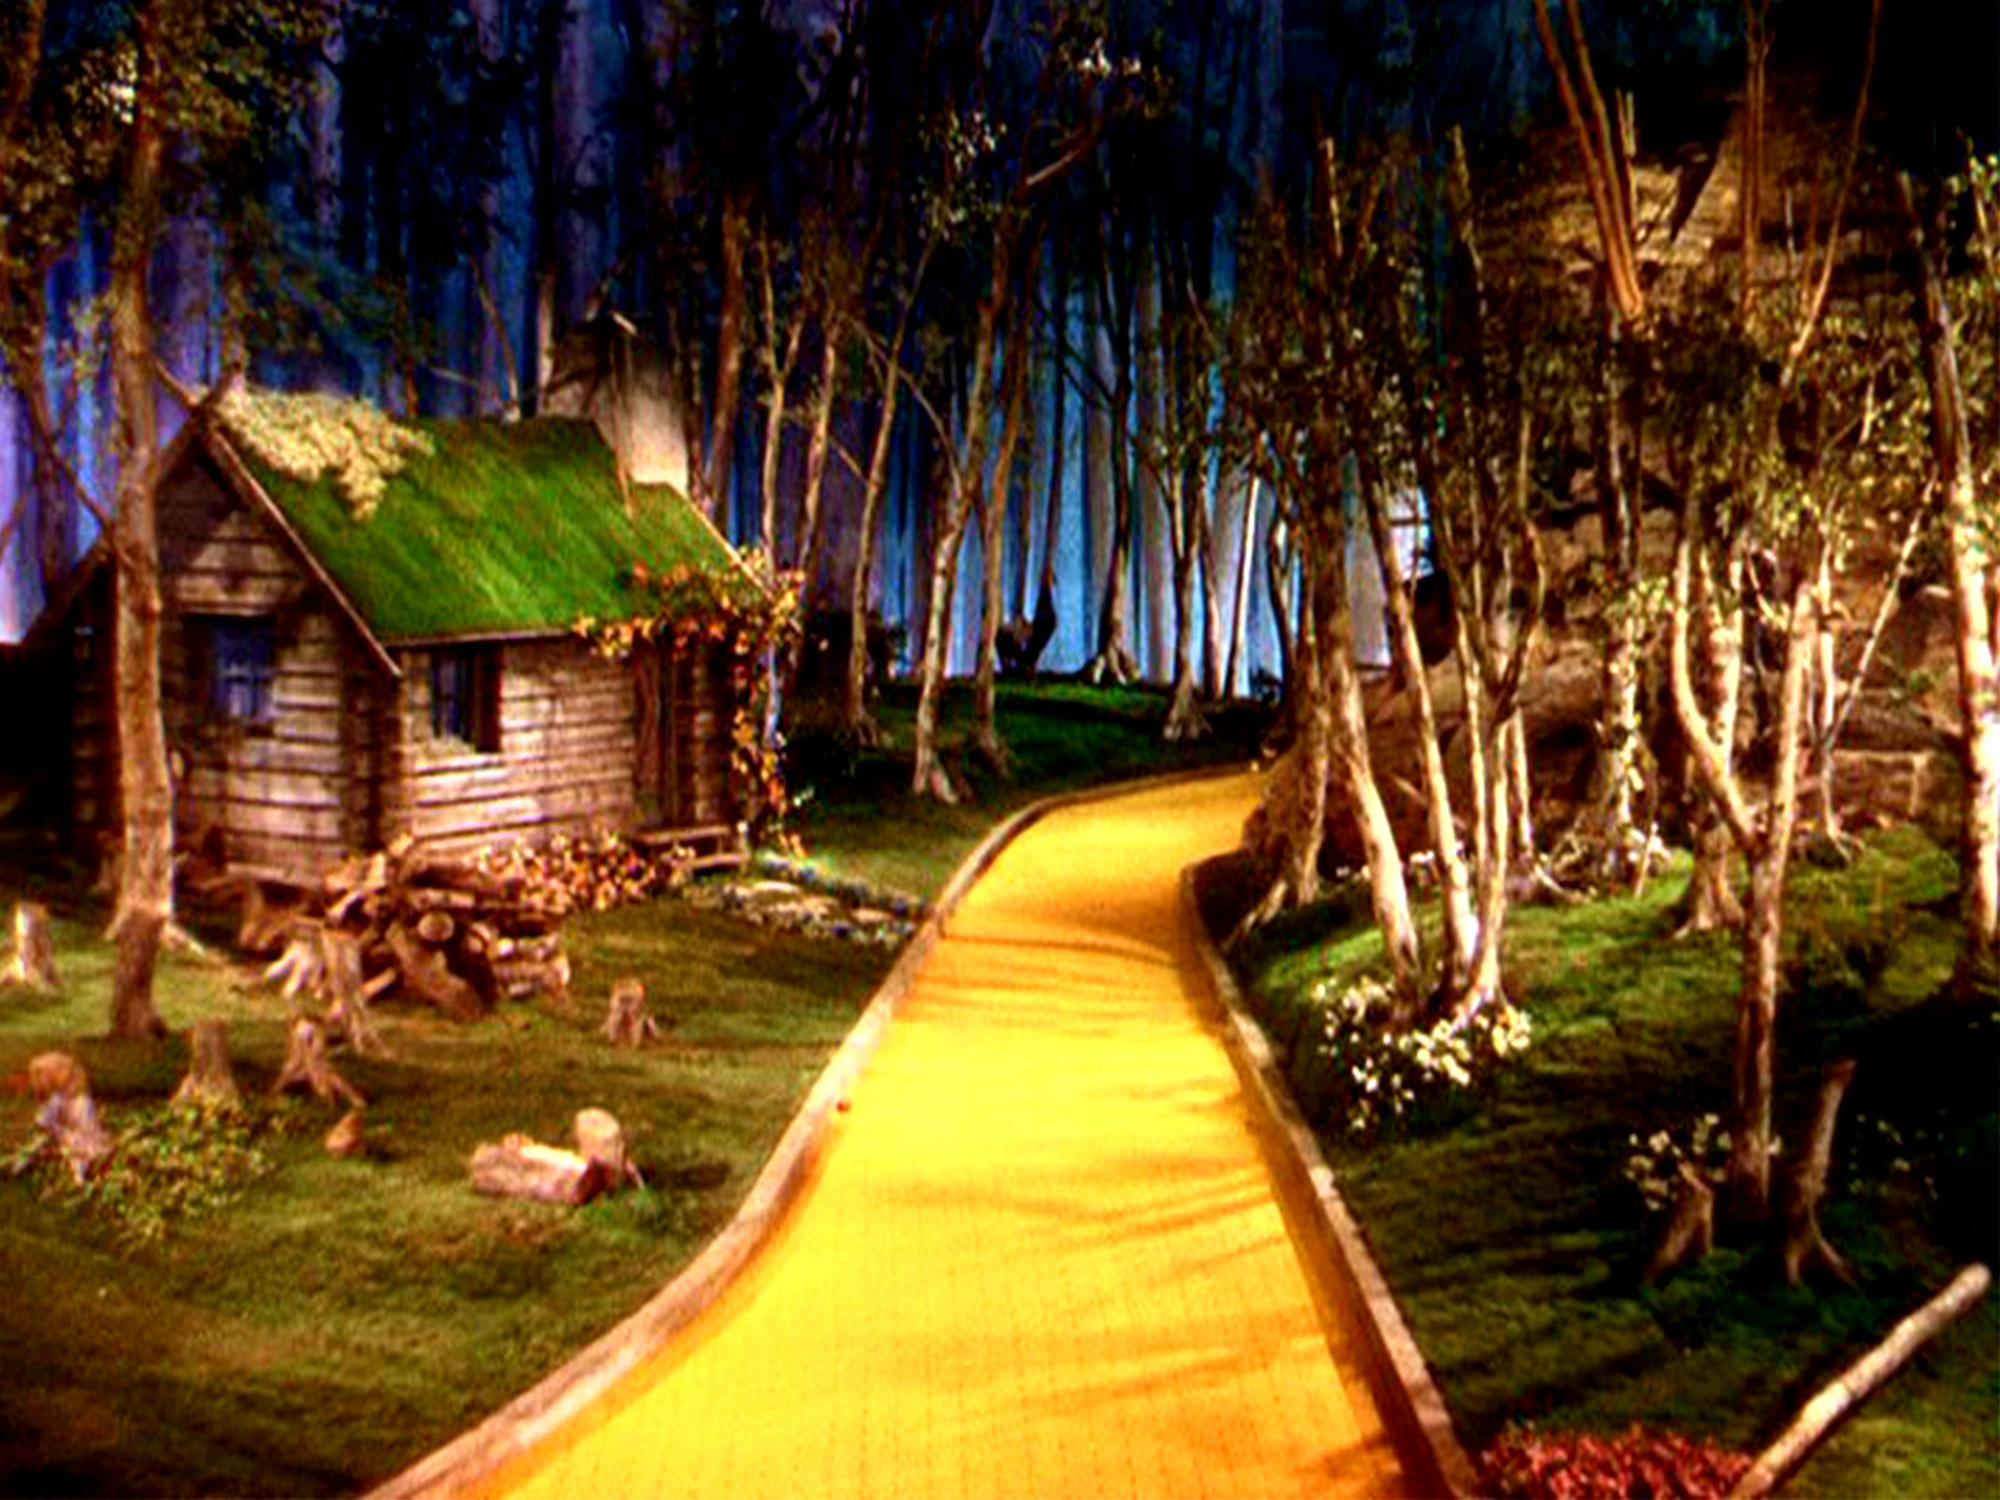 High Quality Wizard Of Oz Background